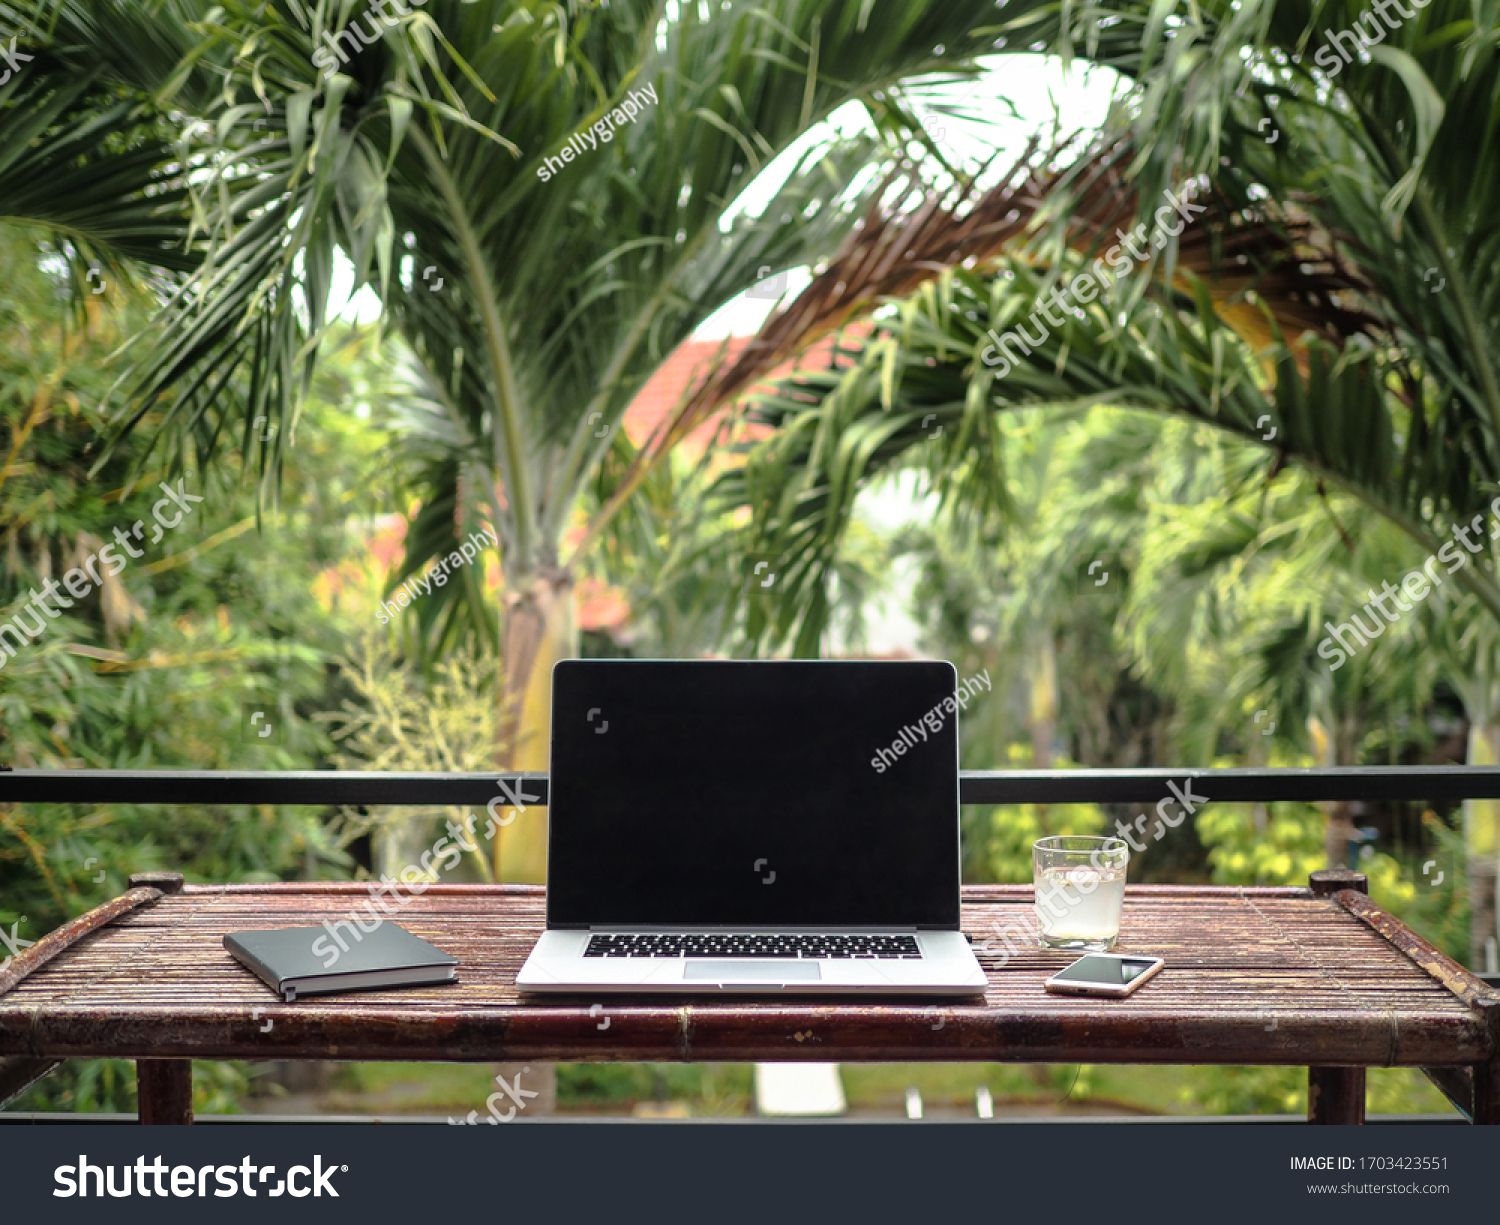 laptop of a remote digital nomad on a wooden bamboo table with notebook, mobile phone and glass in nature with a green tropical background with palm trees #1703423551